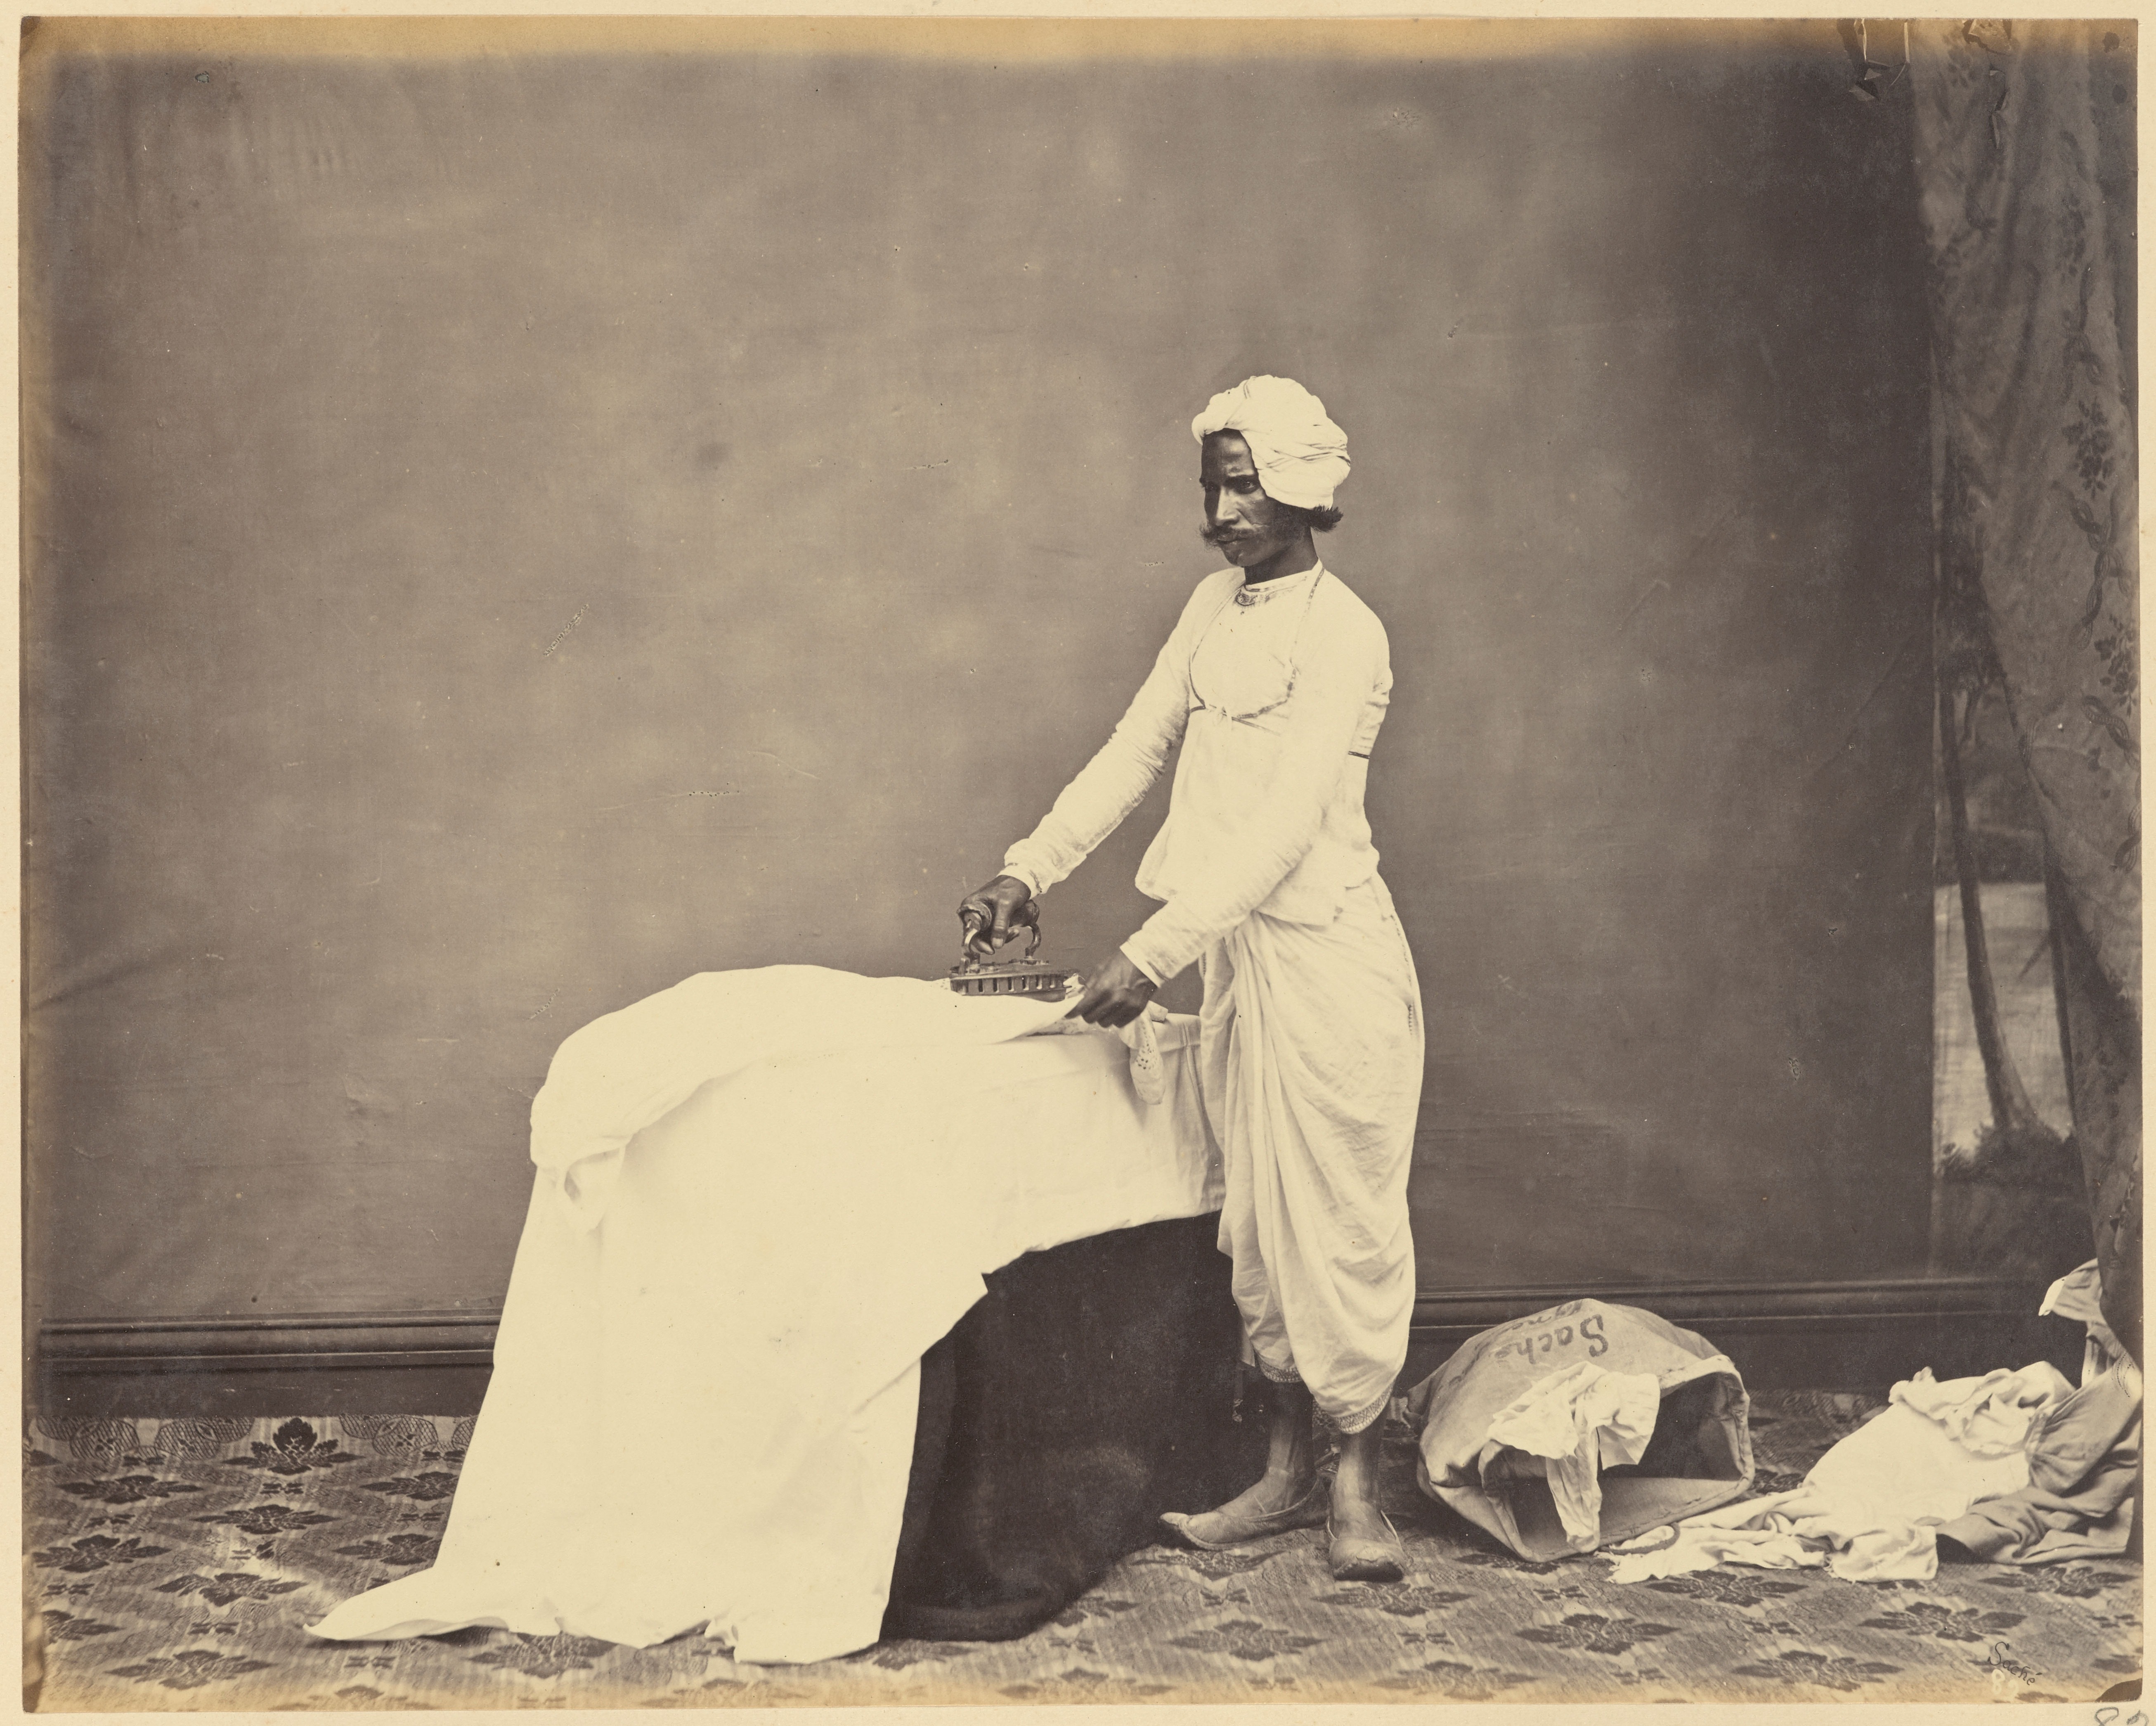 Studio Portrait Of A Man As A Dhobi, Or A Washerman, Ironing A Piece Of Fabric - Circa 1860s